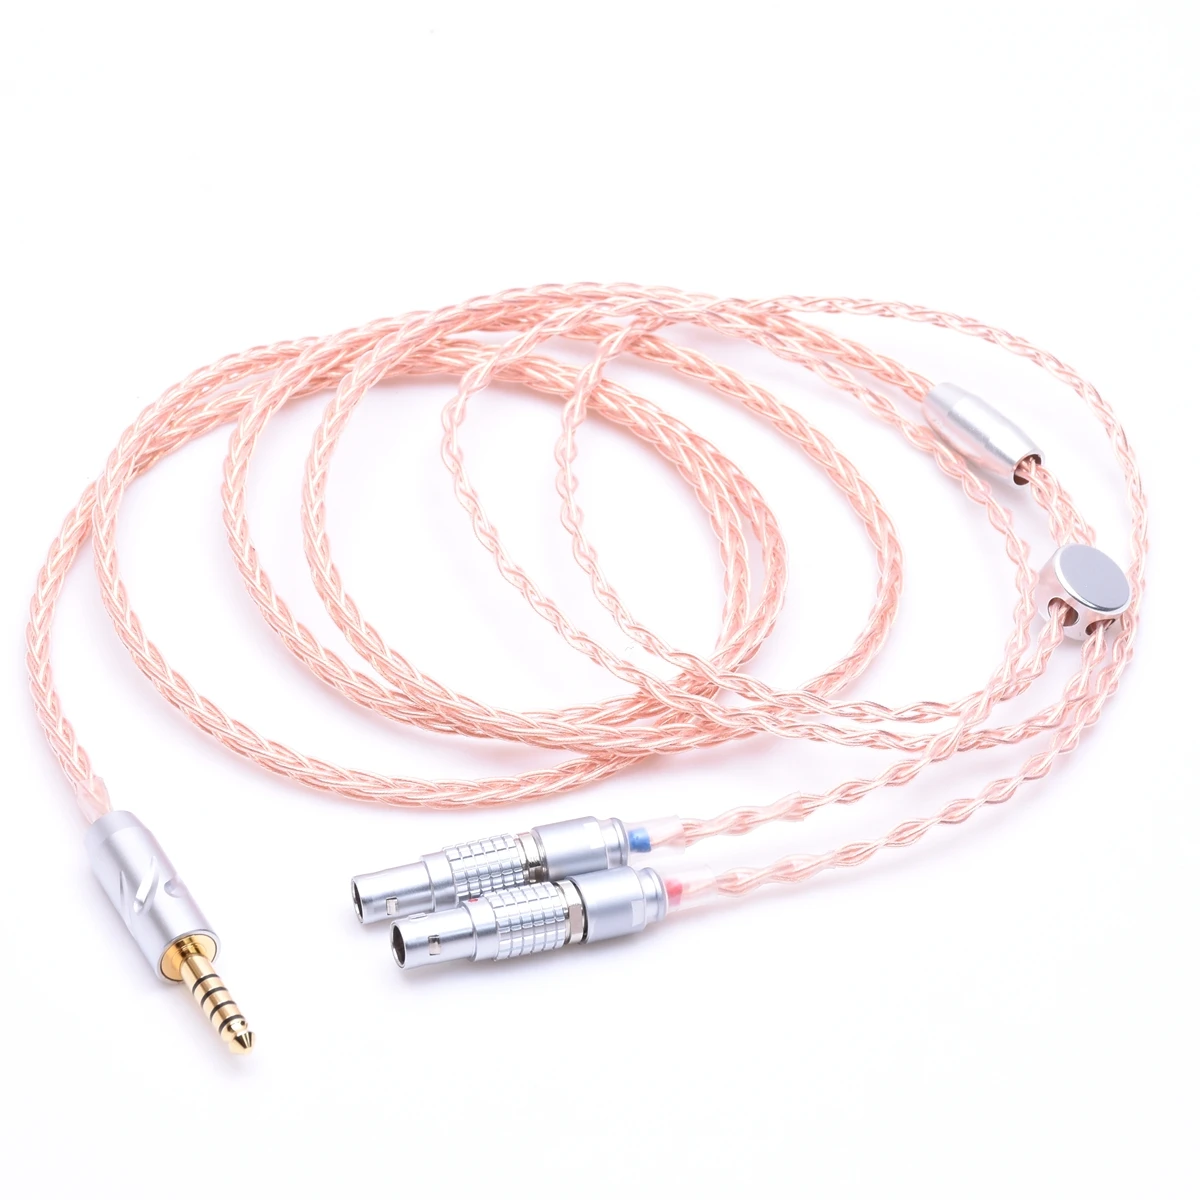 GAGACOCC 1Meter 4.4mm OCC copper Headphone Upgrade Cable for Focal Utopia Ultra enlarge